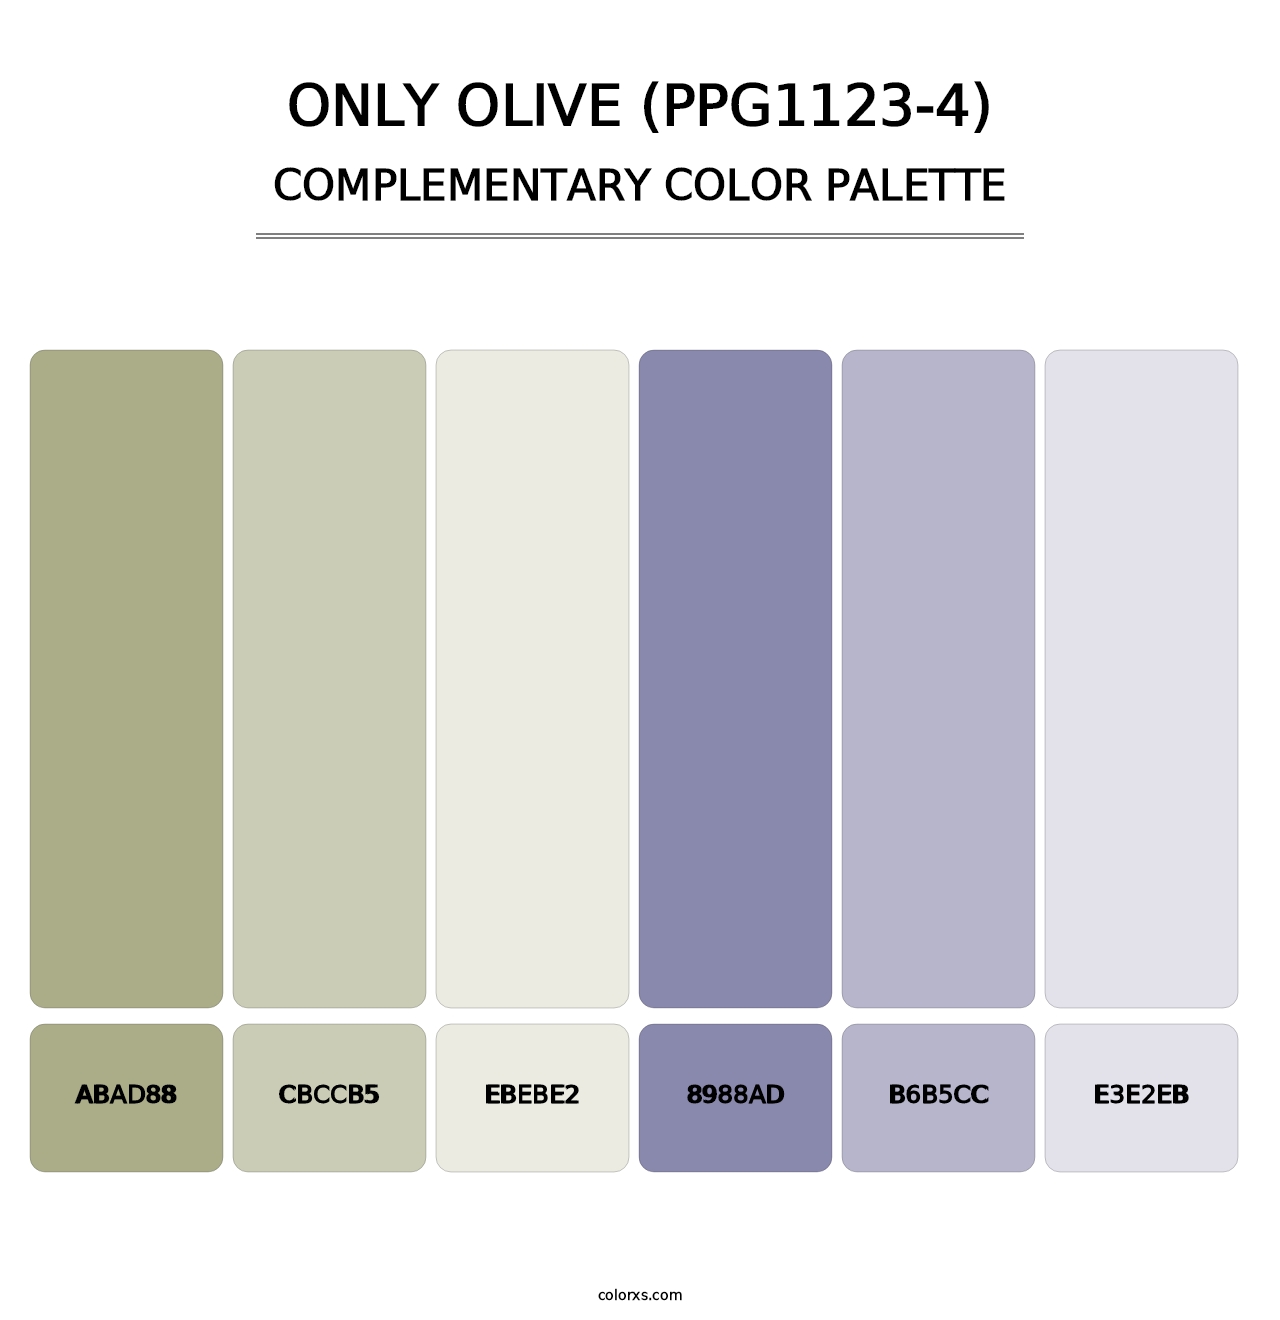 Only Olive (PPG1123-4) - Complementary Color Palette